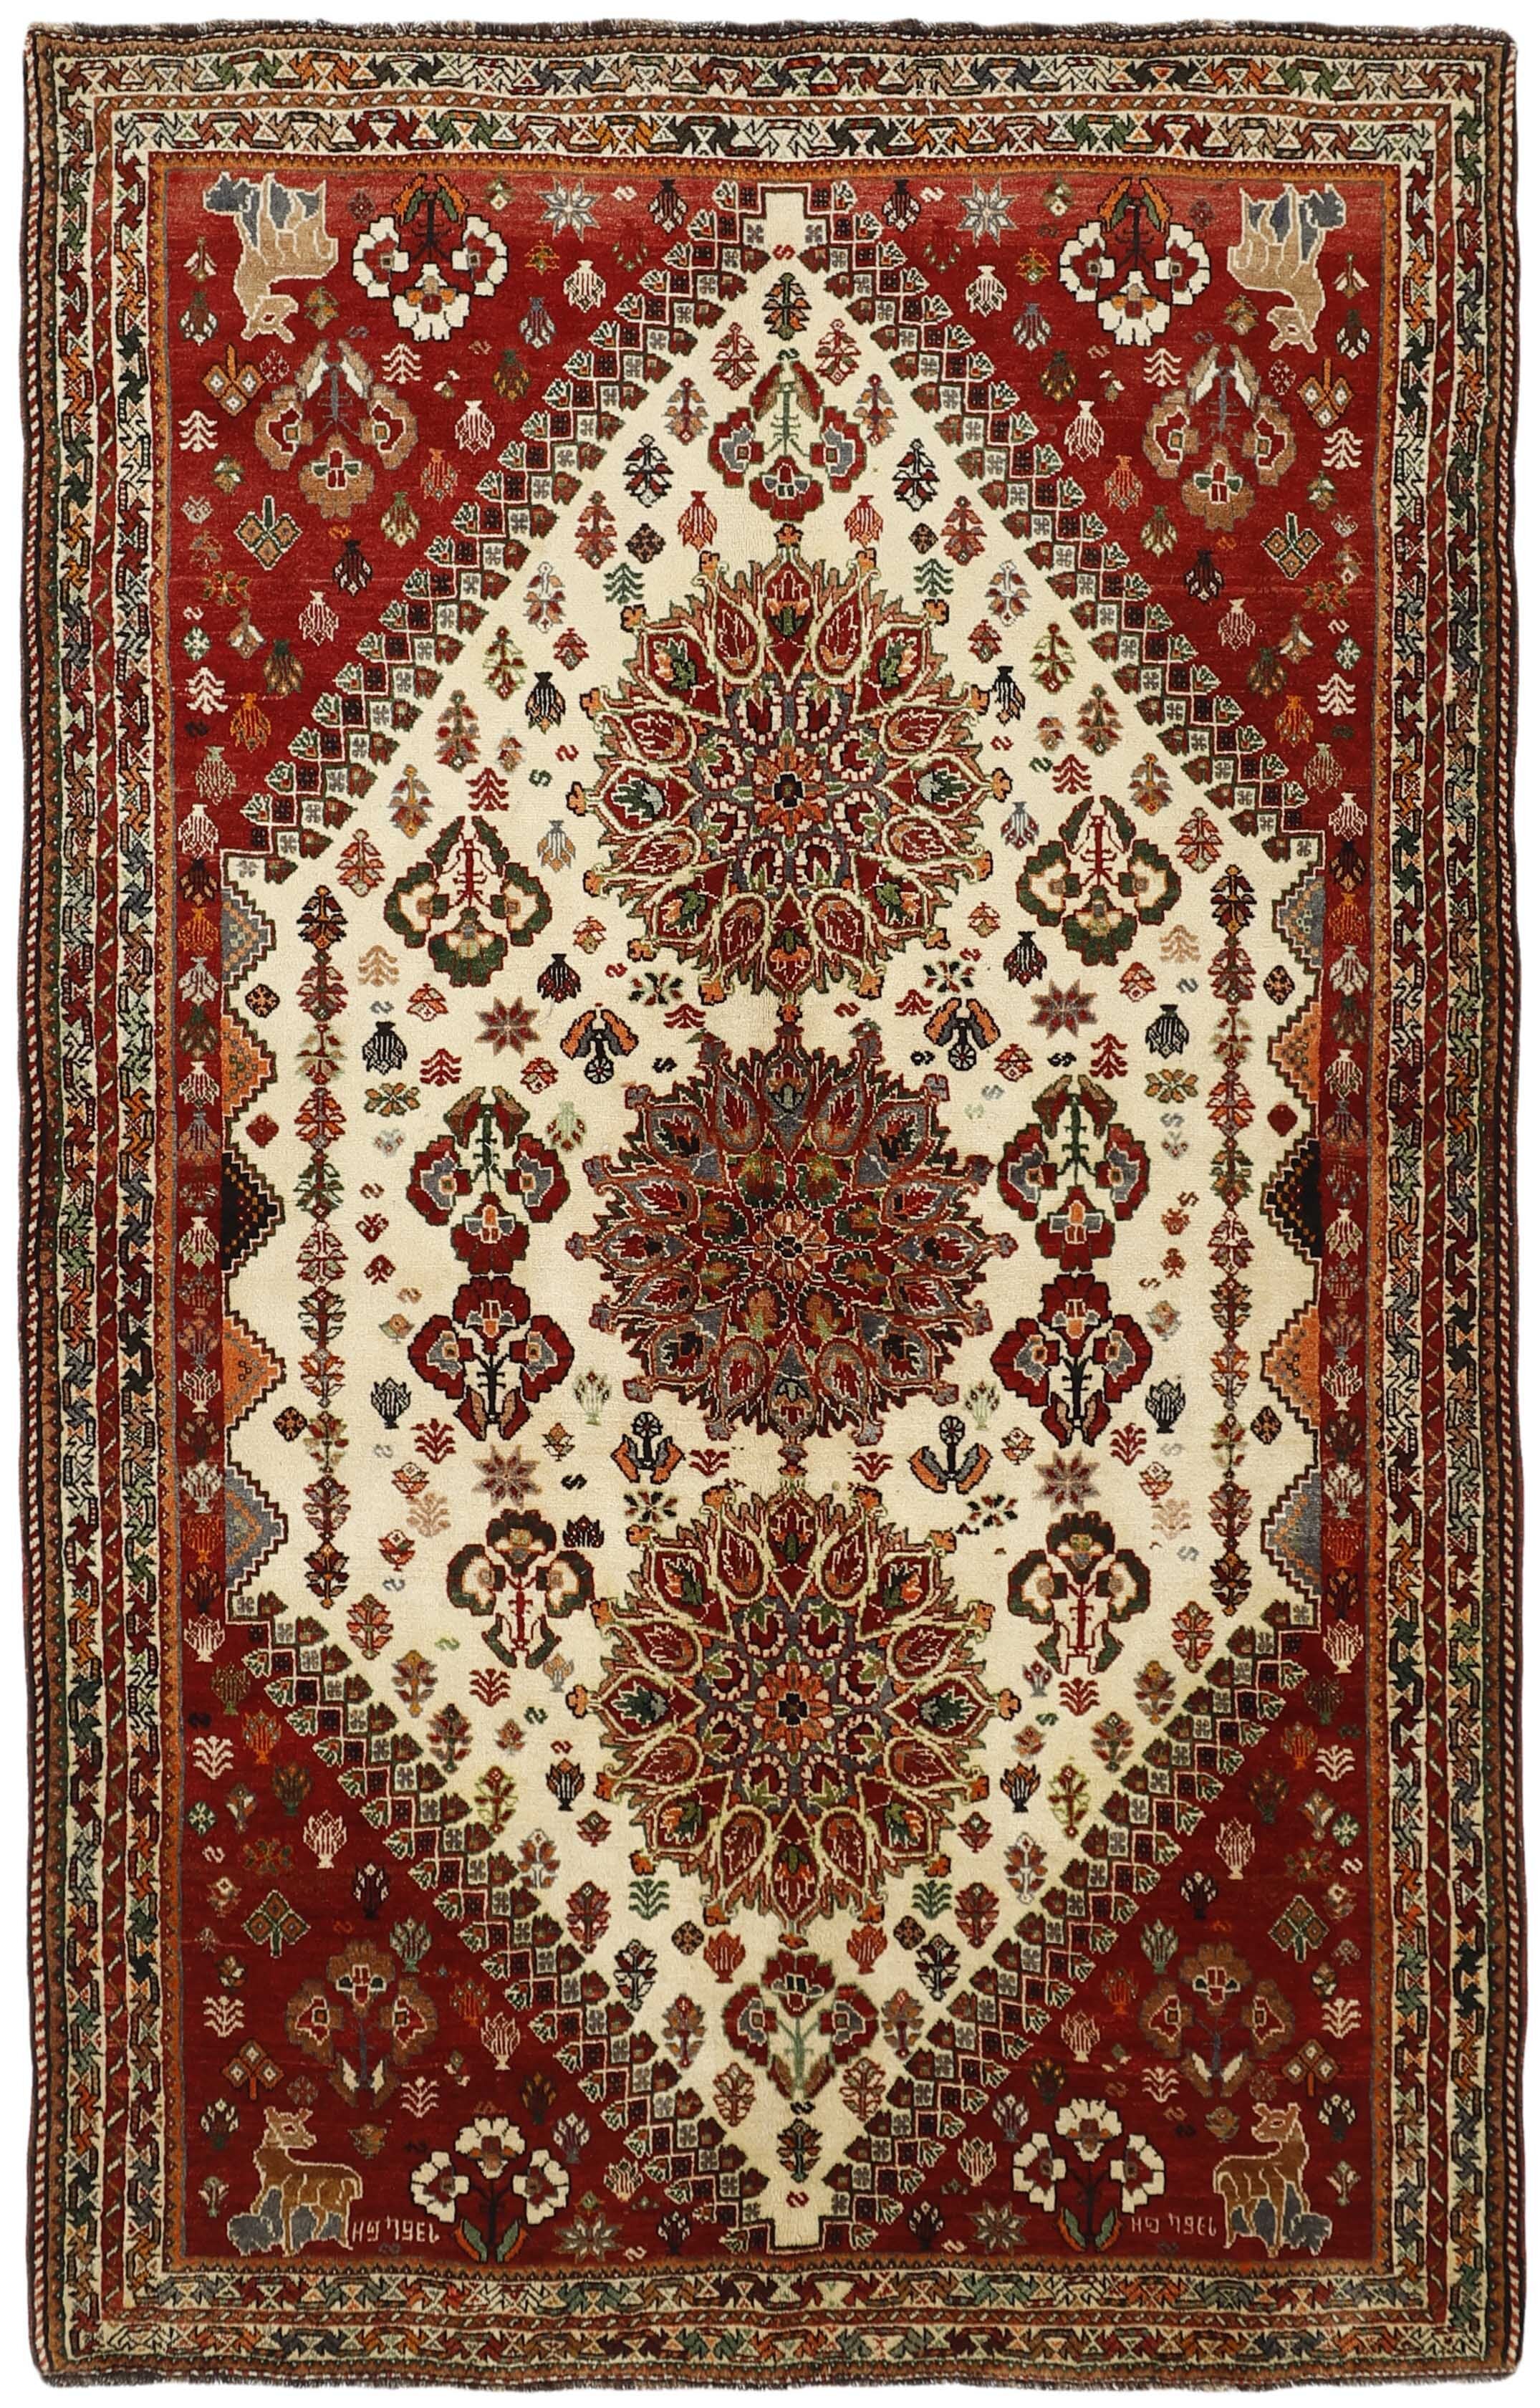 red and black persian rug with geometric design